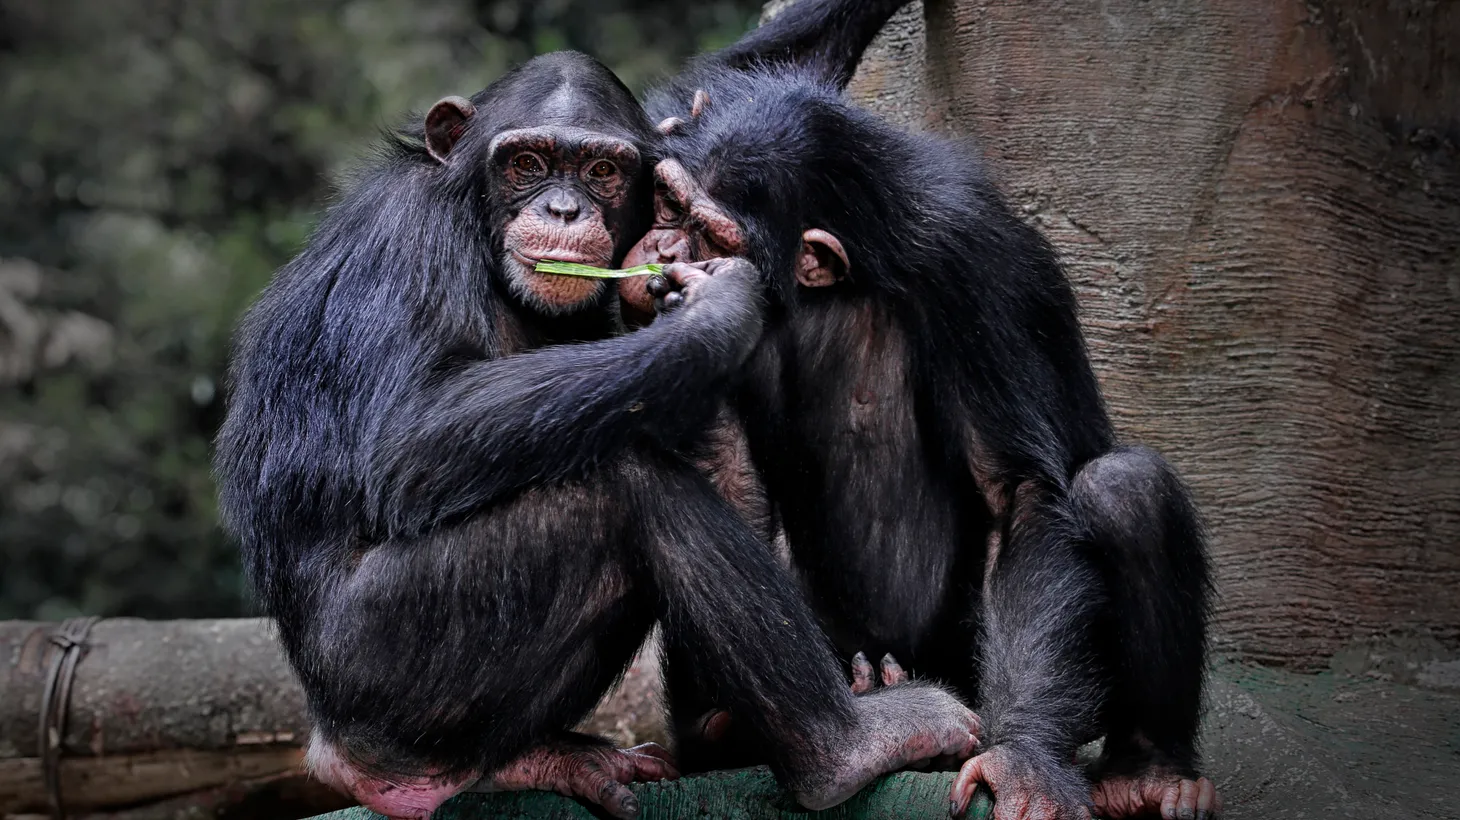 “In all the primates, we see some homosexual activity. And so that's also why that whole argument that homosexual behavior is unnatural … that really doesn't hold up very well,” says Frans de Waal, professor of primate behavior in the Department of Psychology at Emory University.